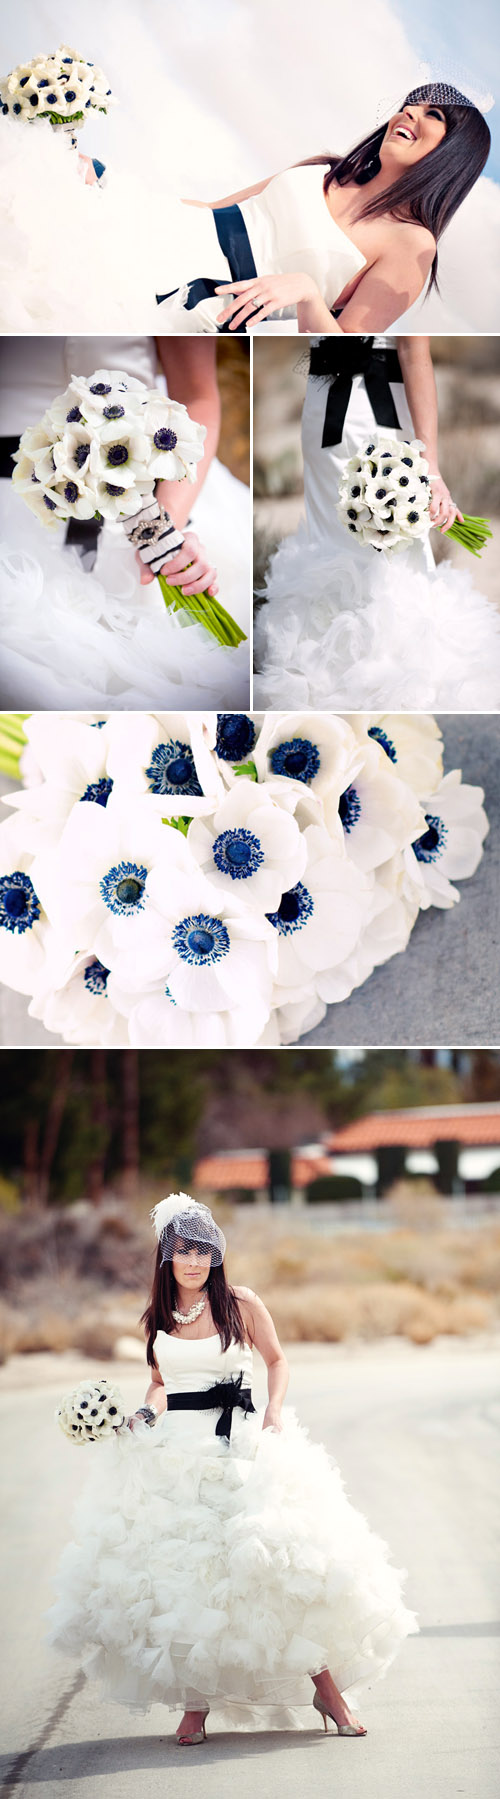 modern anemone bridal bouquet by Bella Signature Design, photos by Latasha Haynes Photography, Holly Clarke Photography, tPoz Photography and Poly Mendes Photography